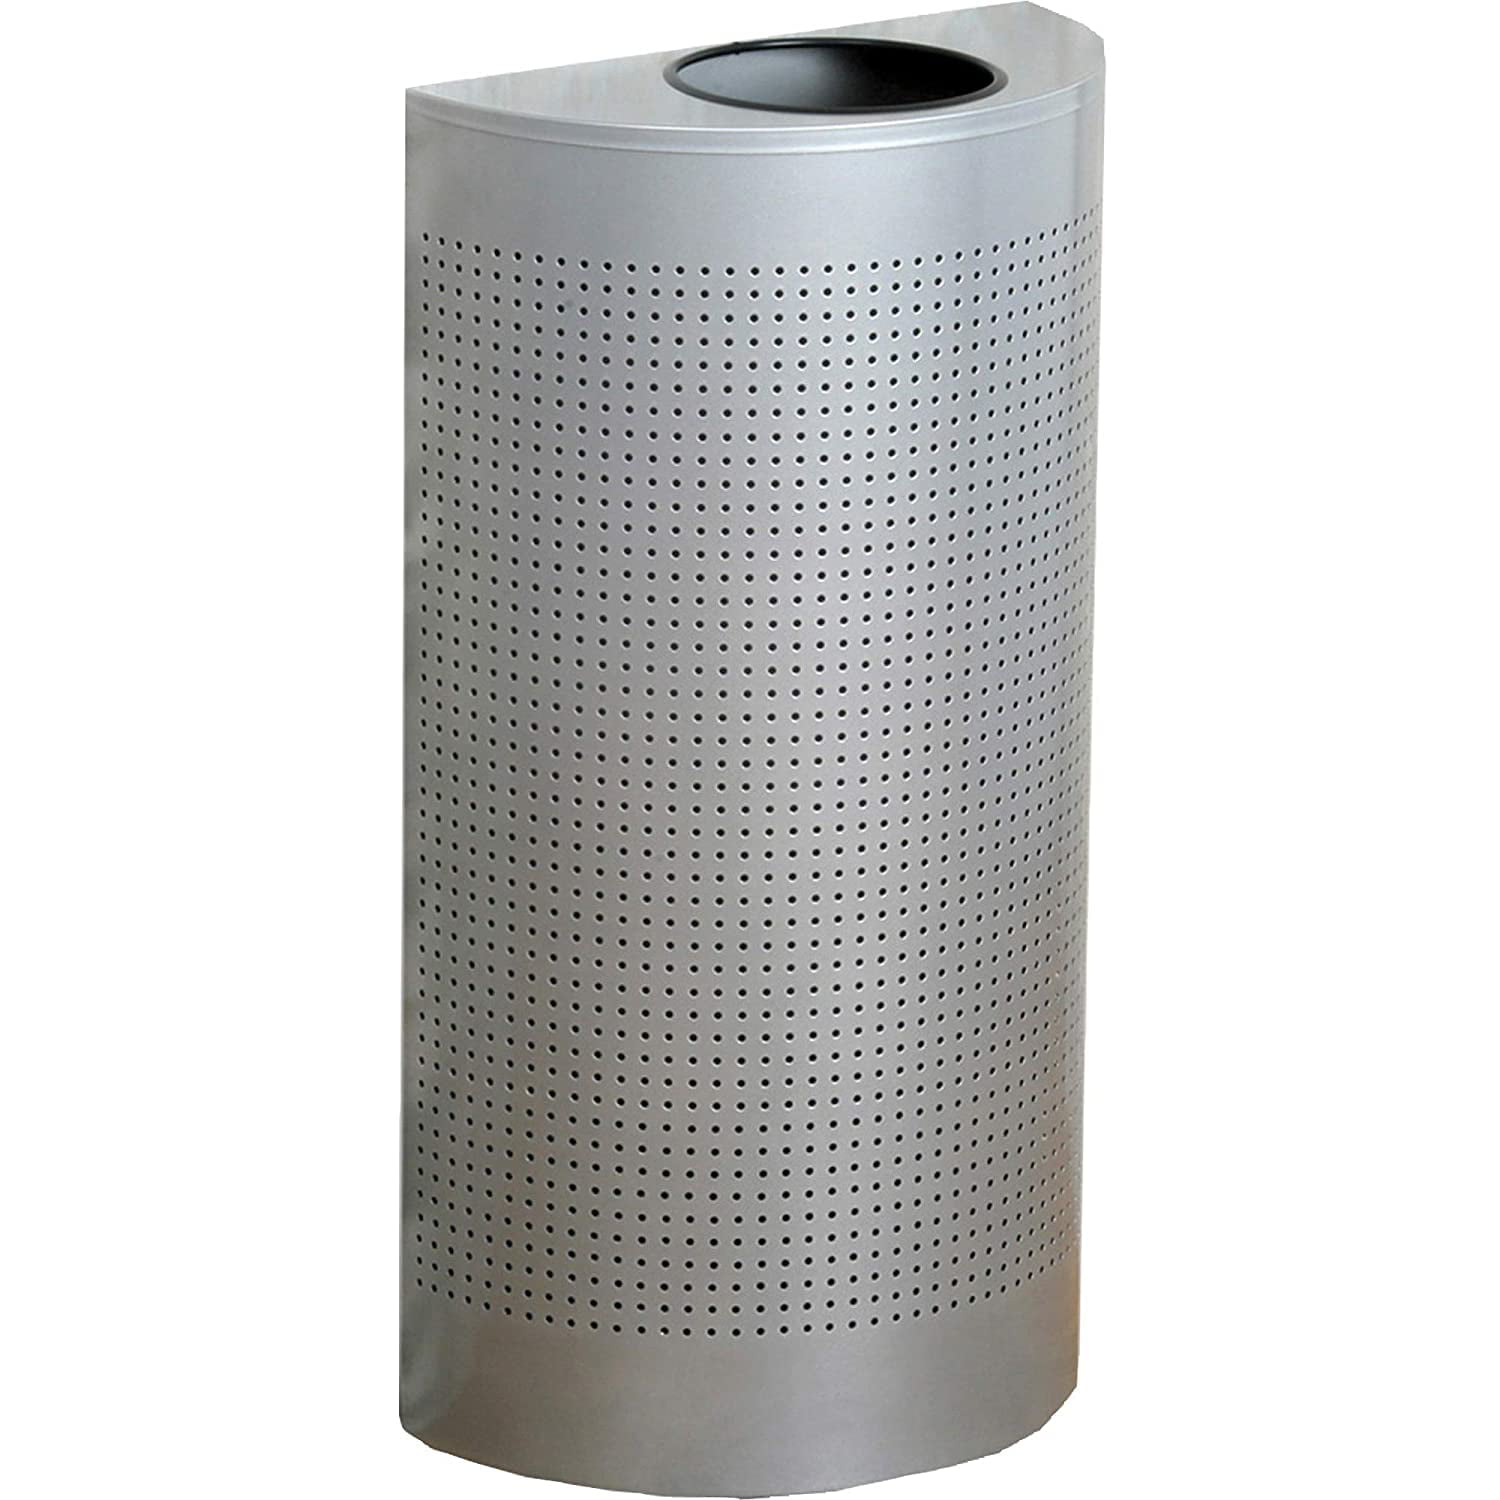 RUBBERMAID COMMERCIAL FG354600GRAY 22 gal. LLDPE Round Trash Can